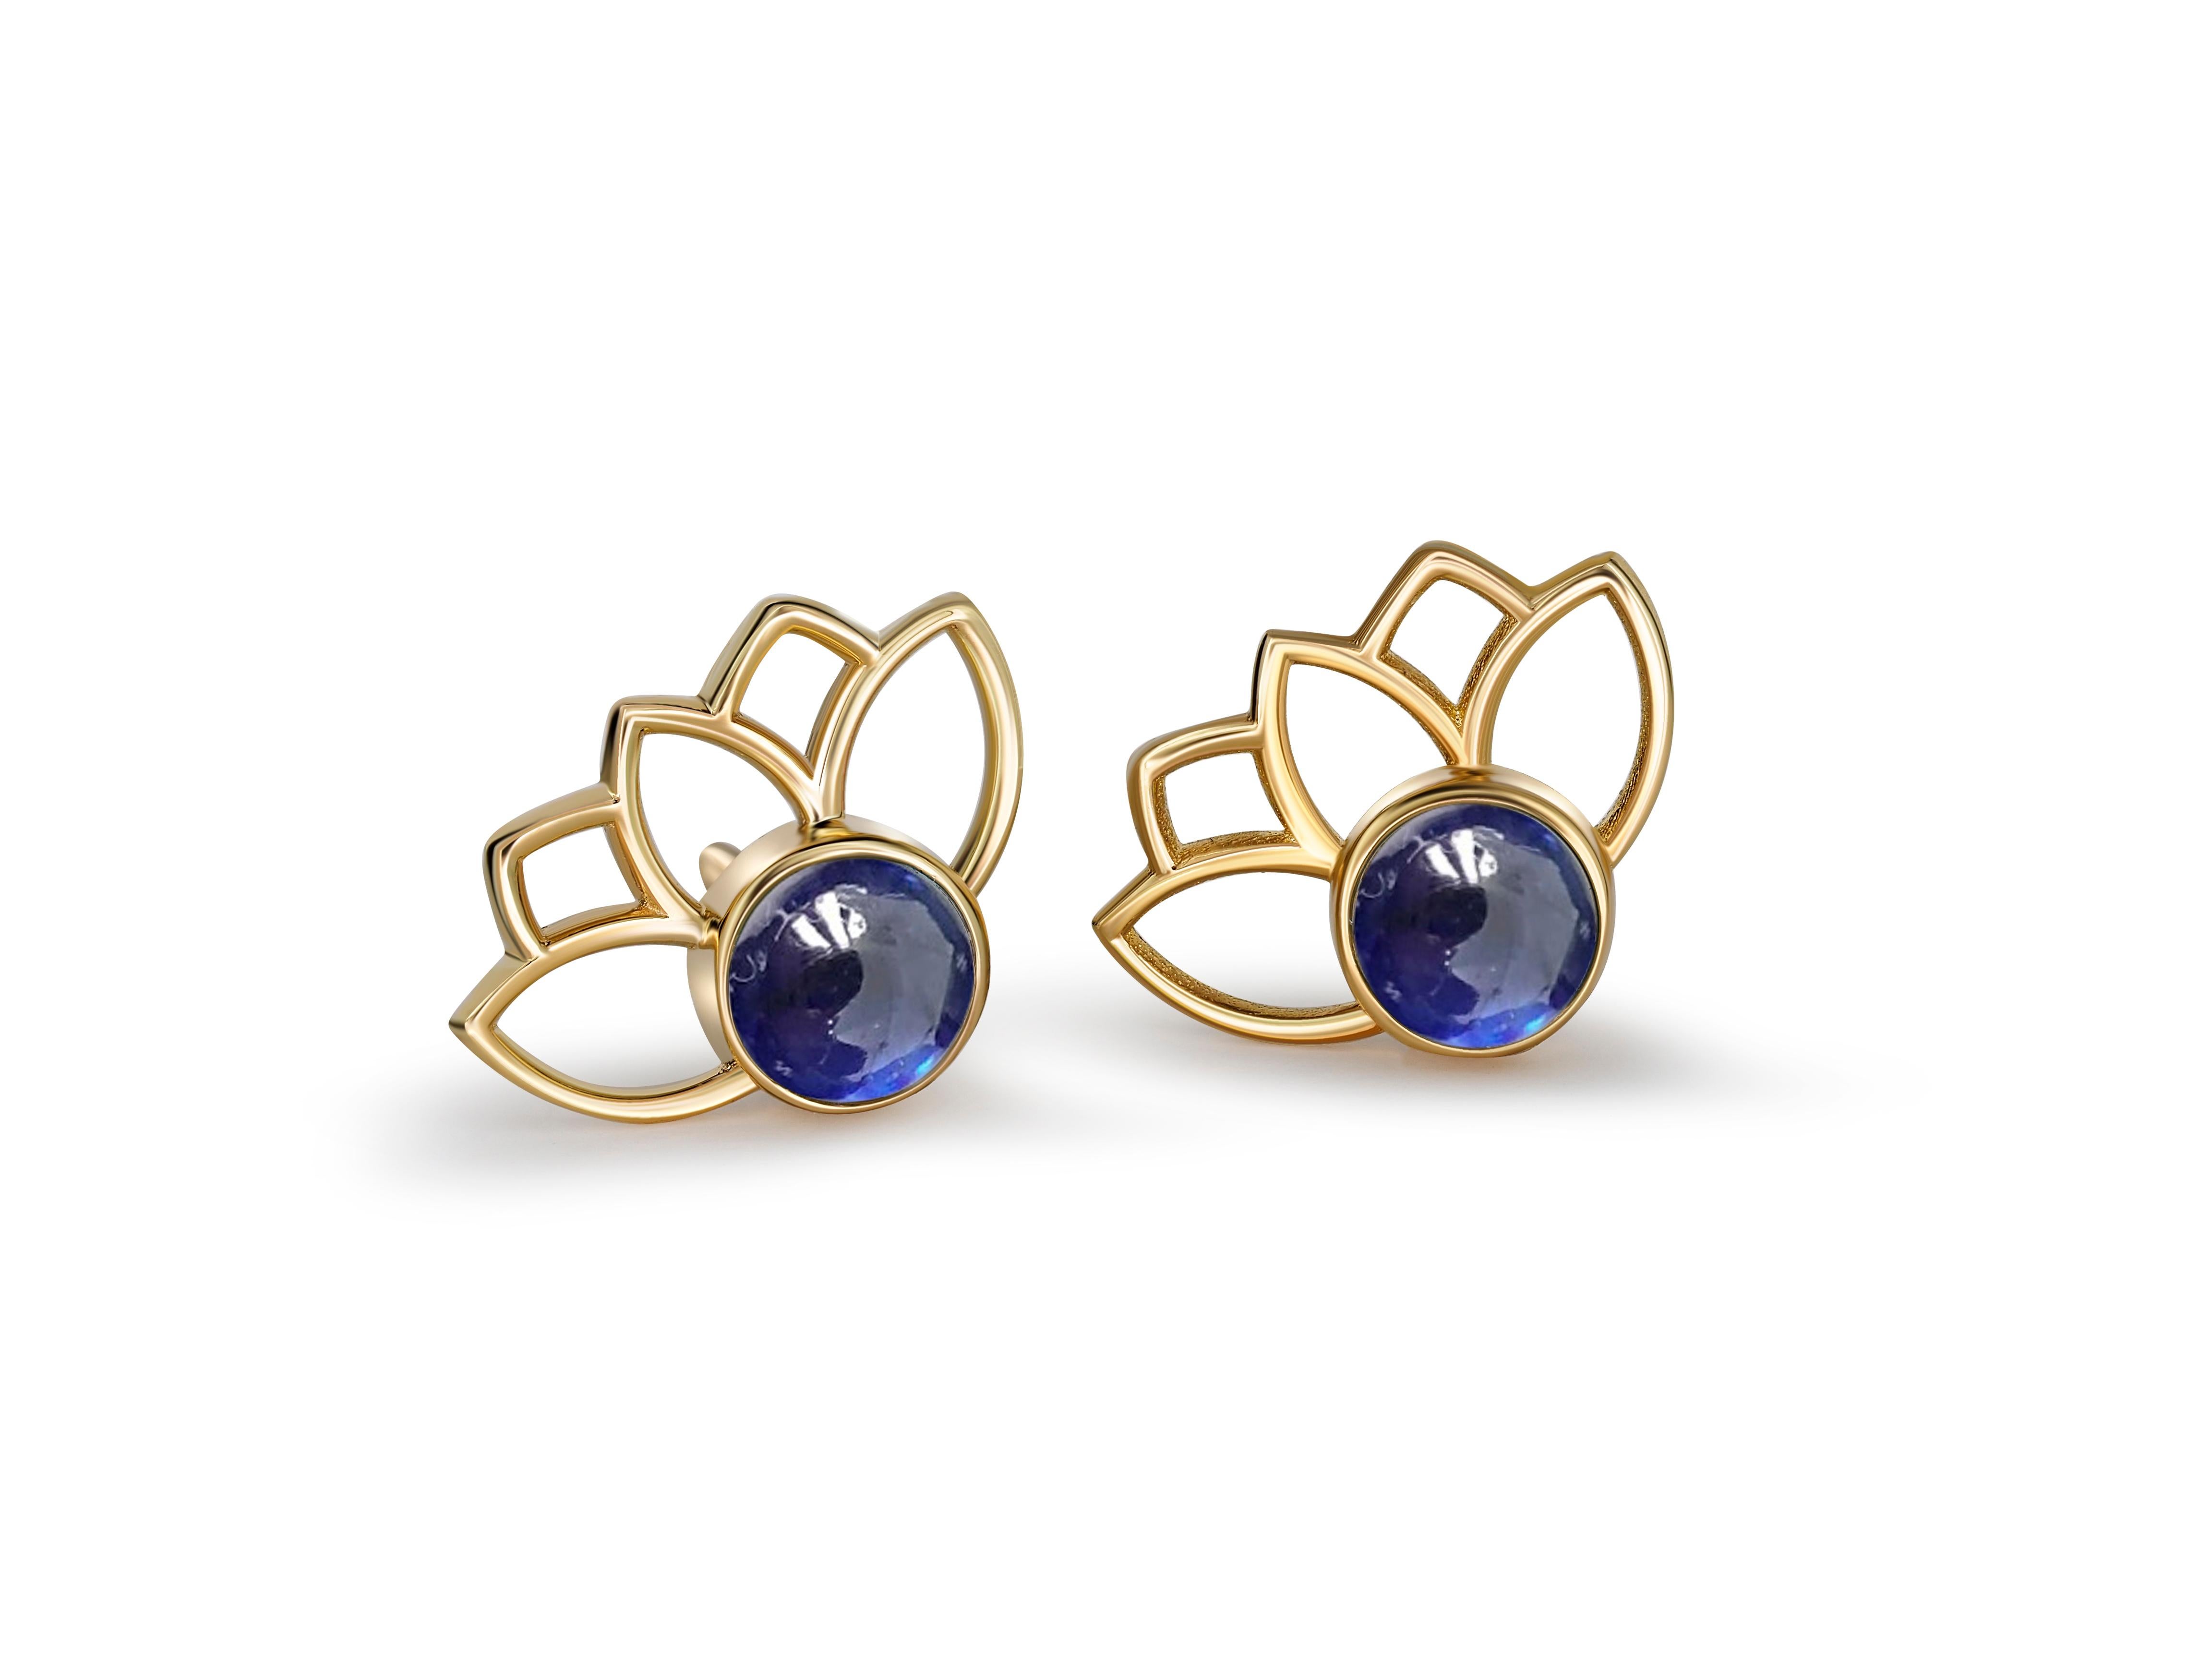 Modern Lotus earrings studs with sapphires in 14k gold.  For Sale